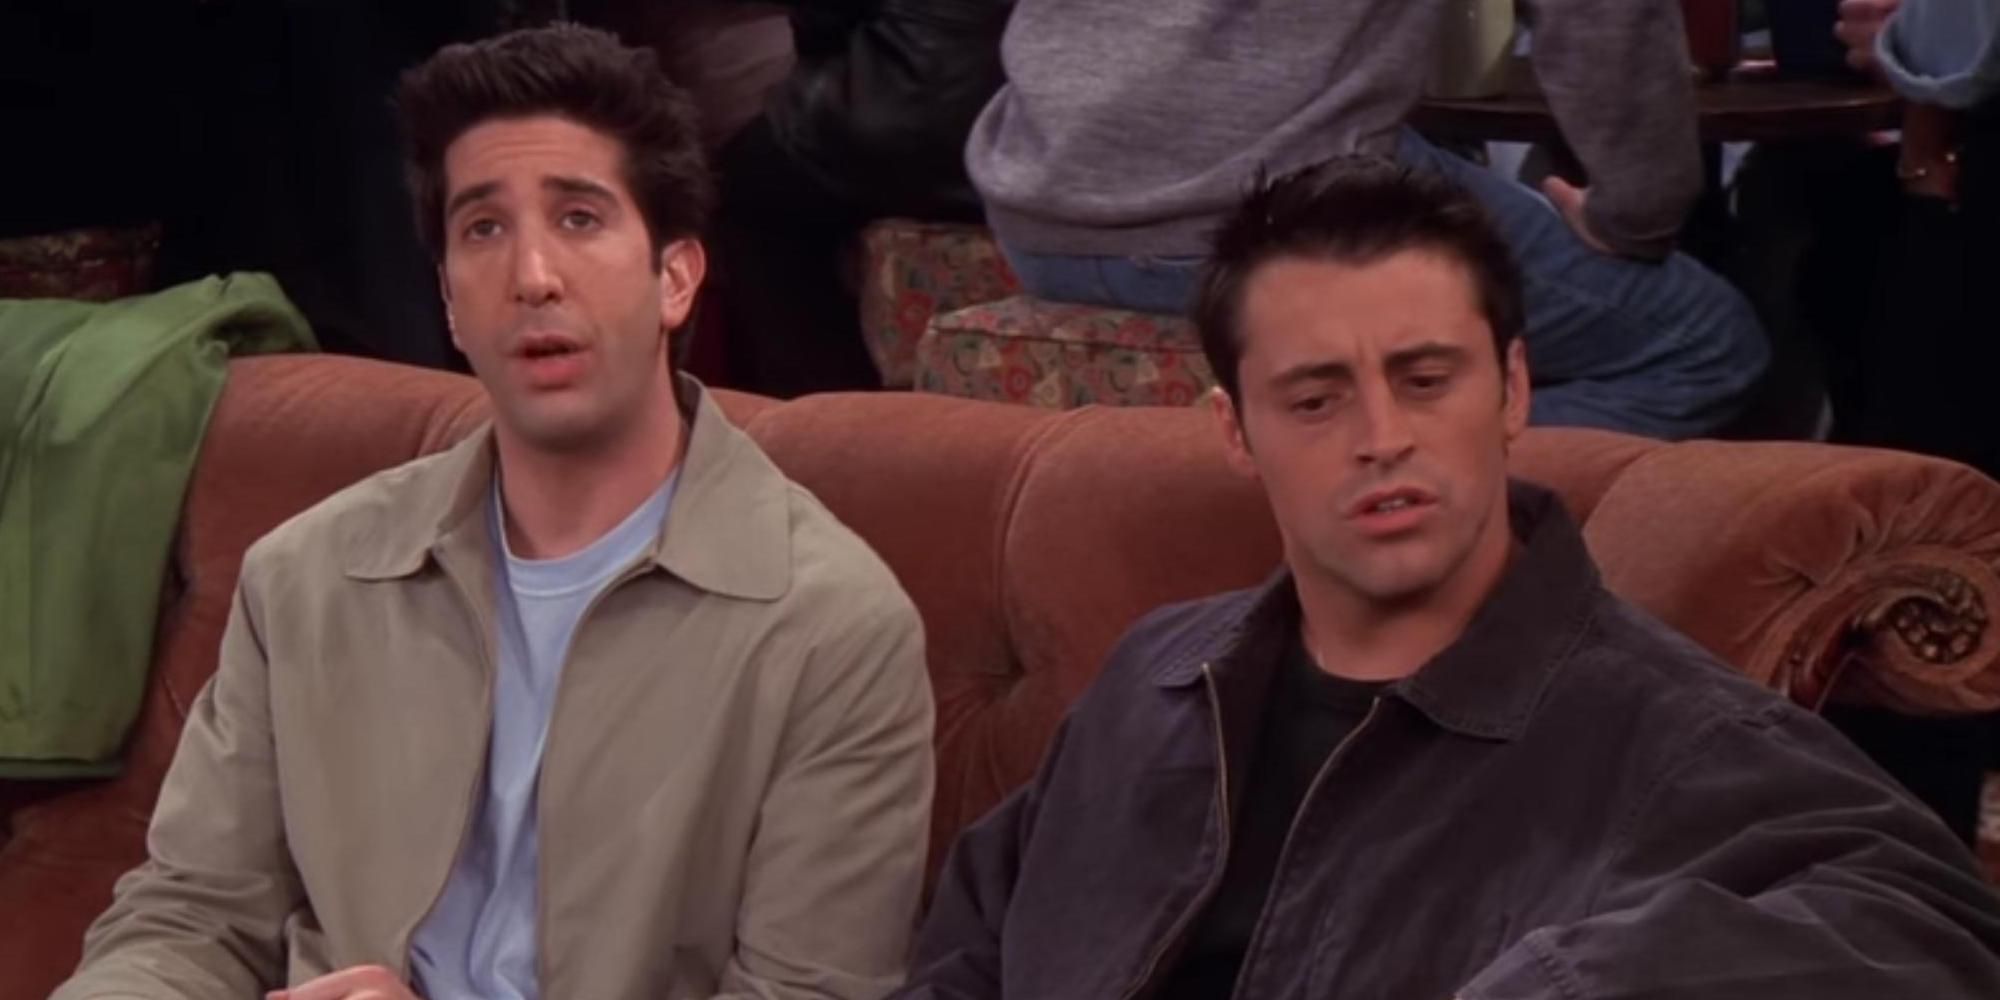 Friends & Home Alone Shared Universe Theory Confirmed By Art Director